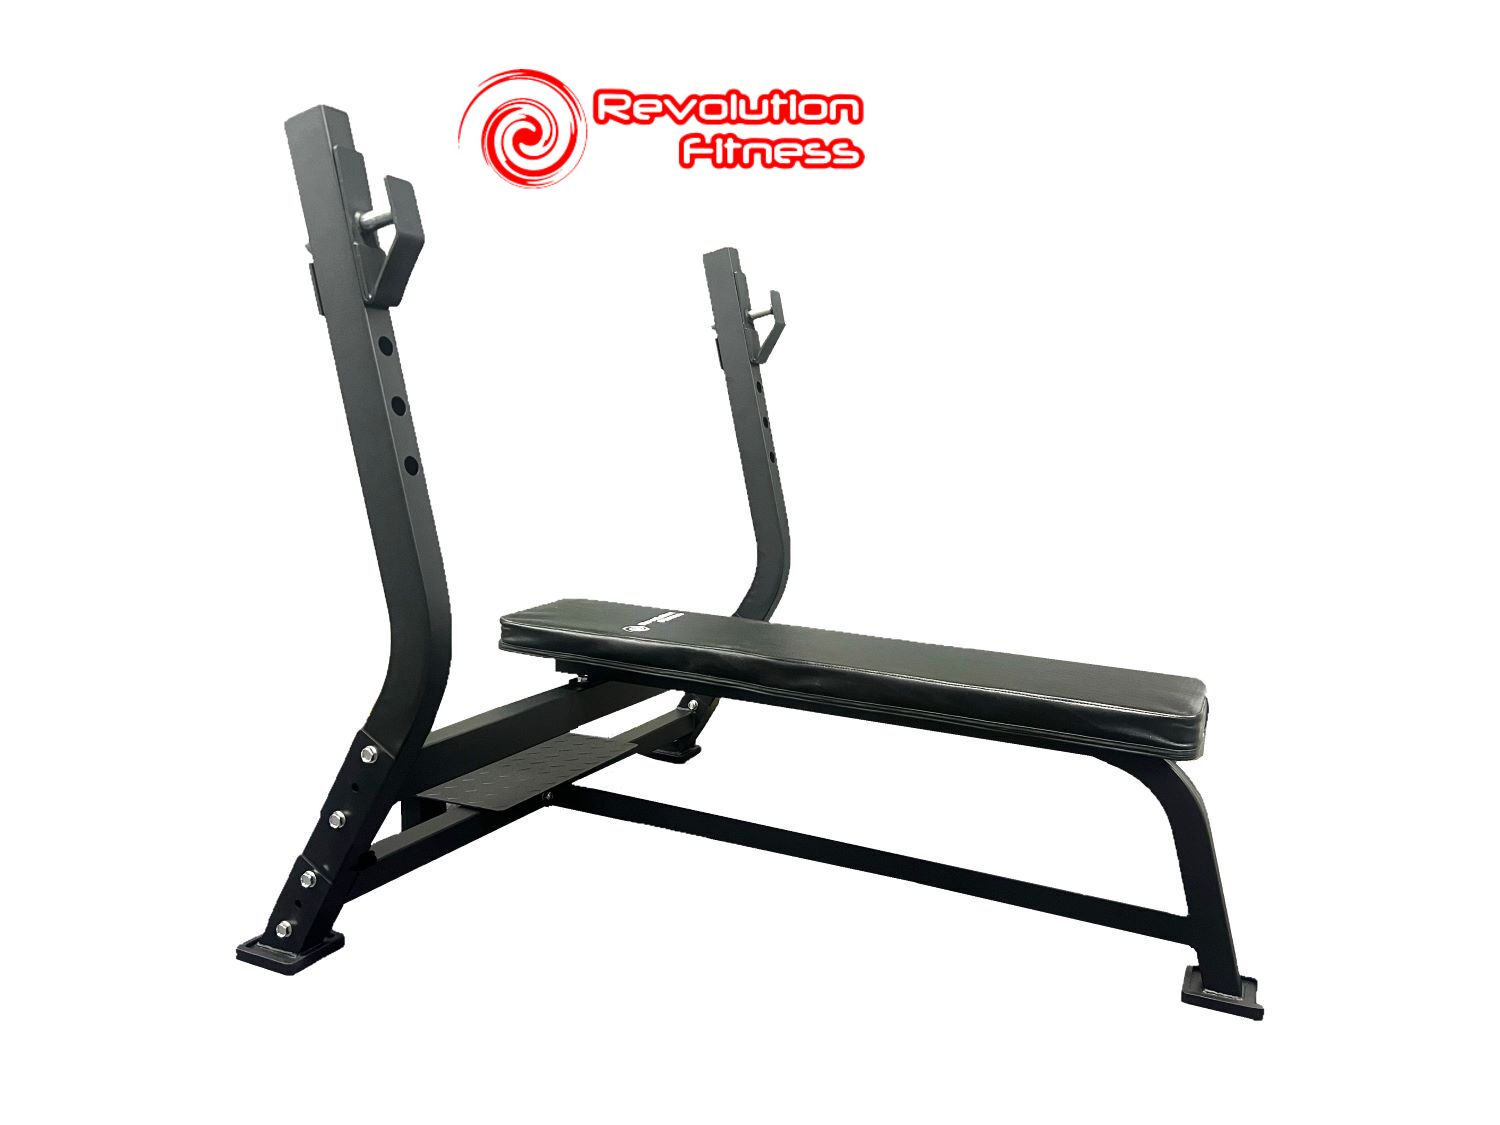 Great quality bench press from Revolution Fitness